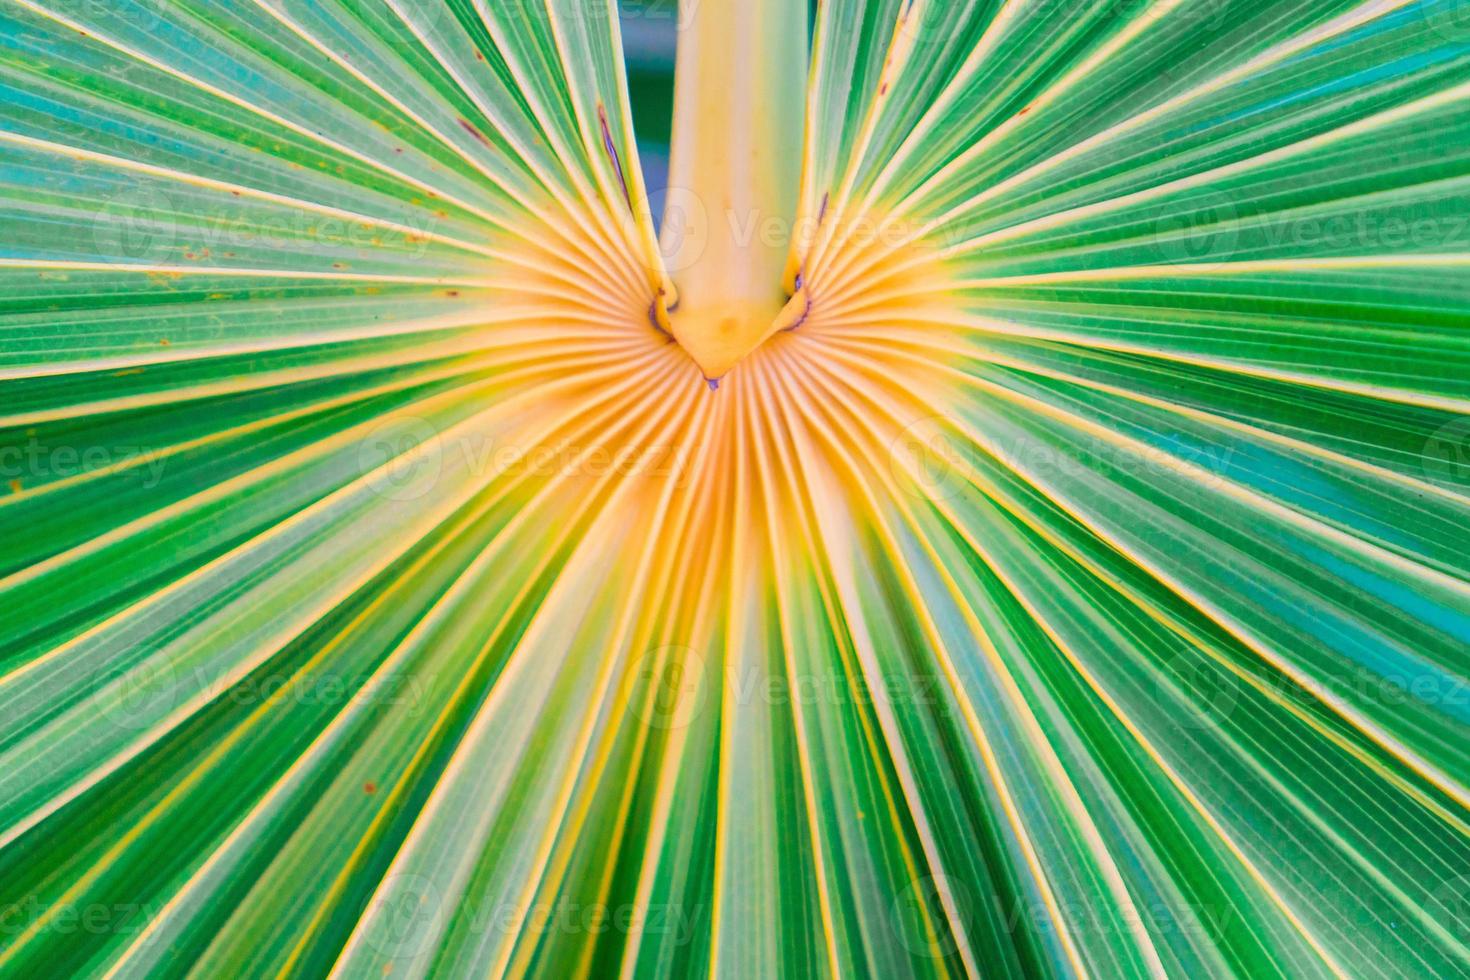 Lines and textures of green palm leaves at exoric island photo